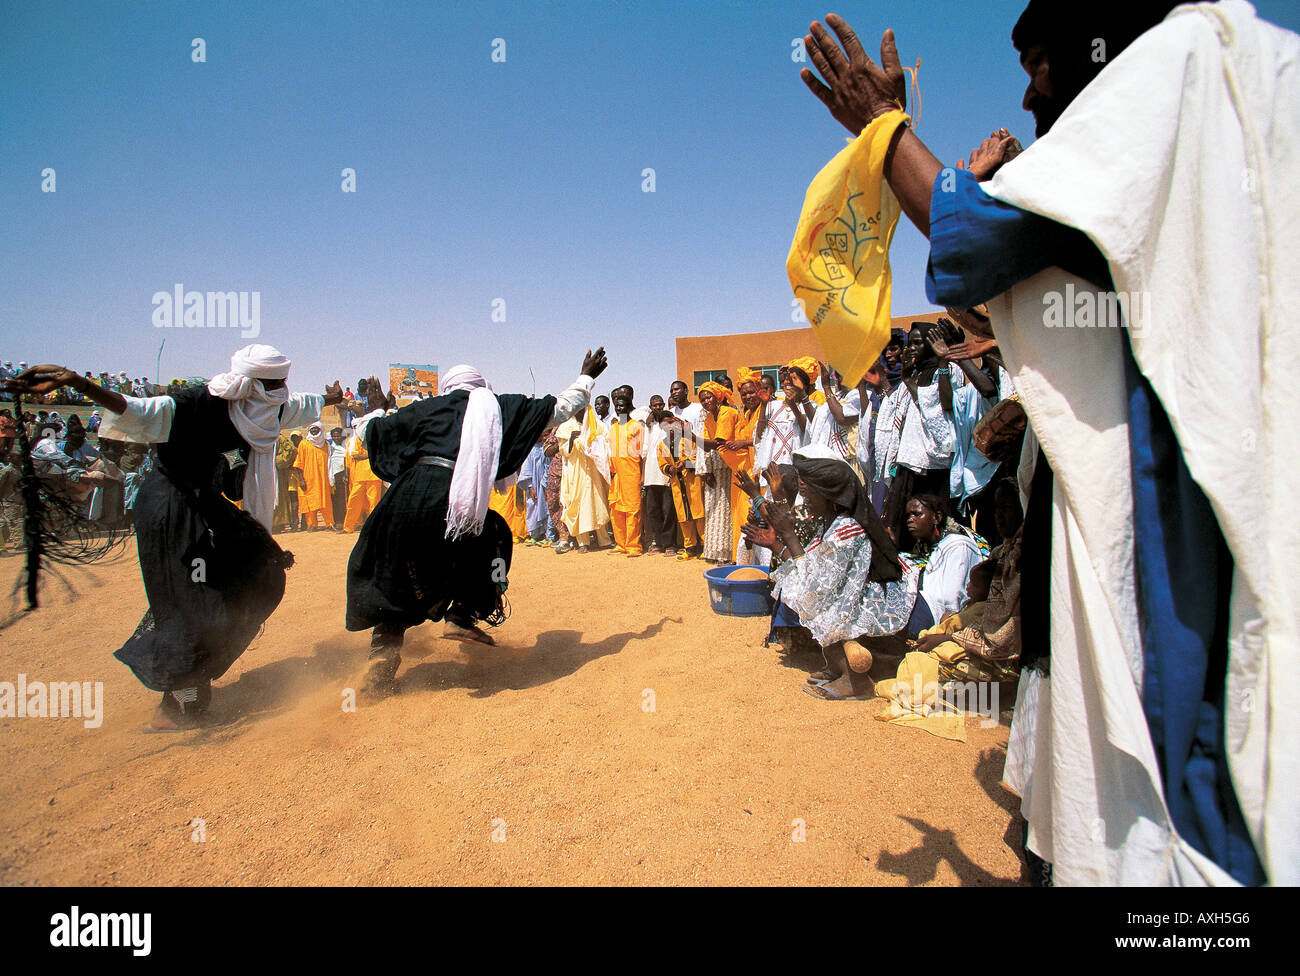 Tuaregs dancing in political party meeting, Agadez Niger. Stock Photo